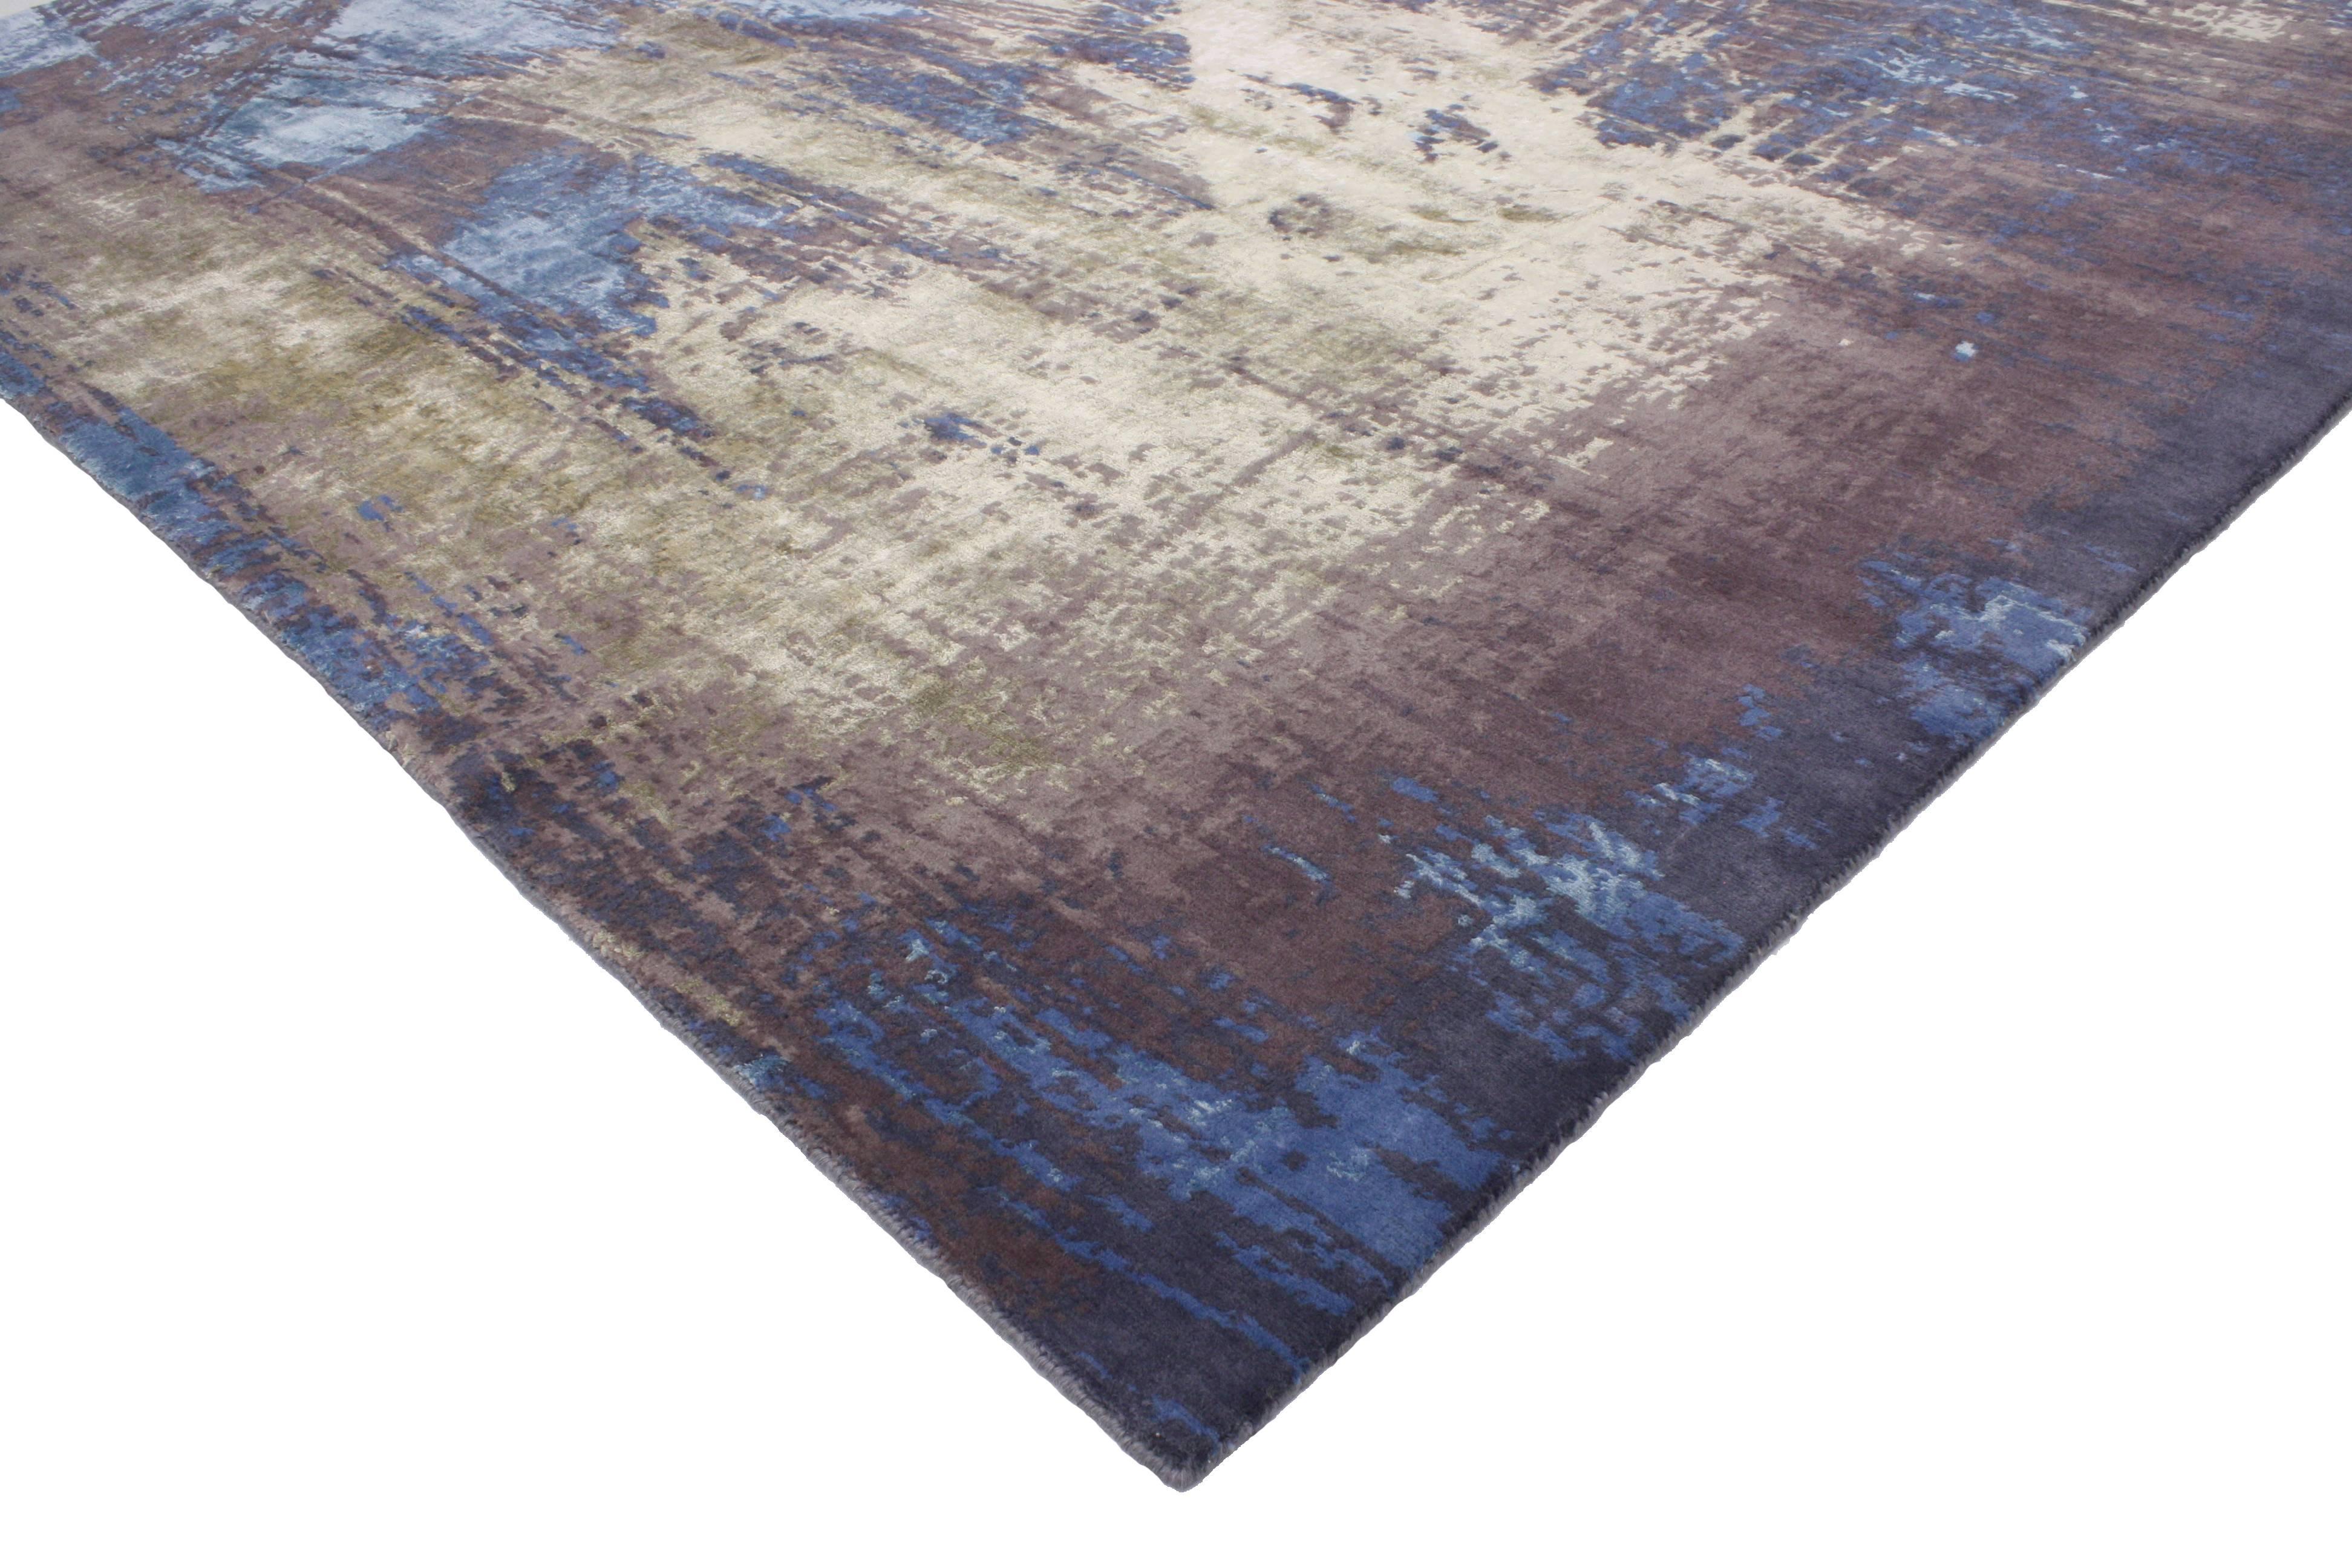 This Modern style rug with contemporary abstract scratch texture is a mix of contemporary genius, with funky, original and a good pop of color. The striated, smoky field of cornflower blue is dappled with rich strokes of purple-gray, sage green and